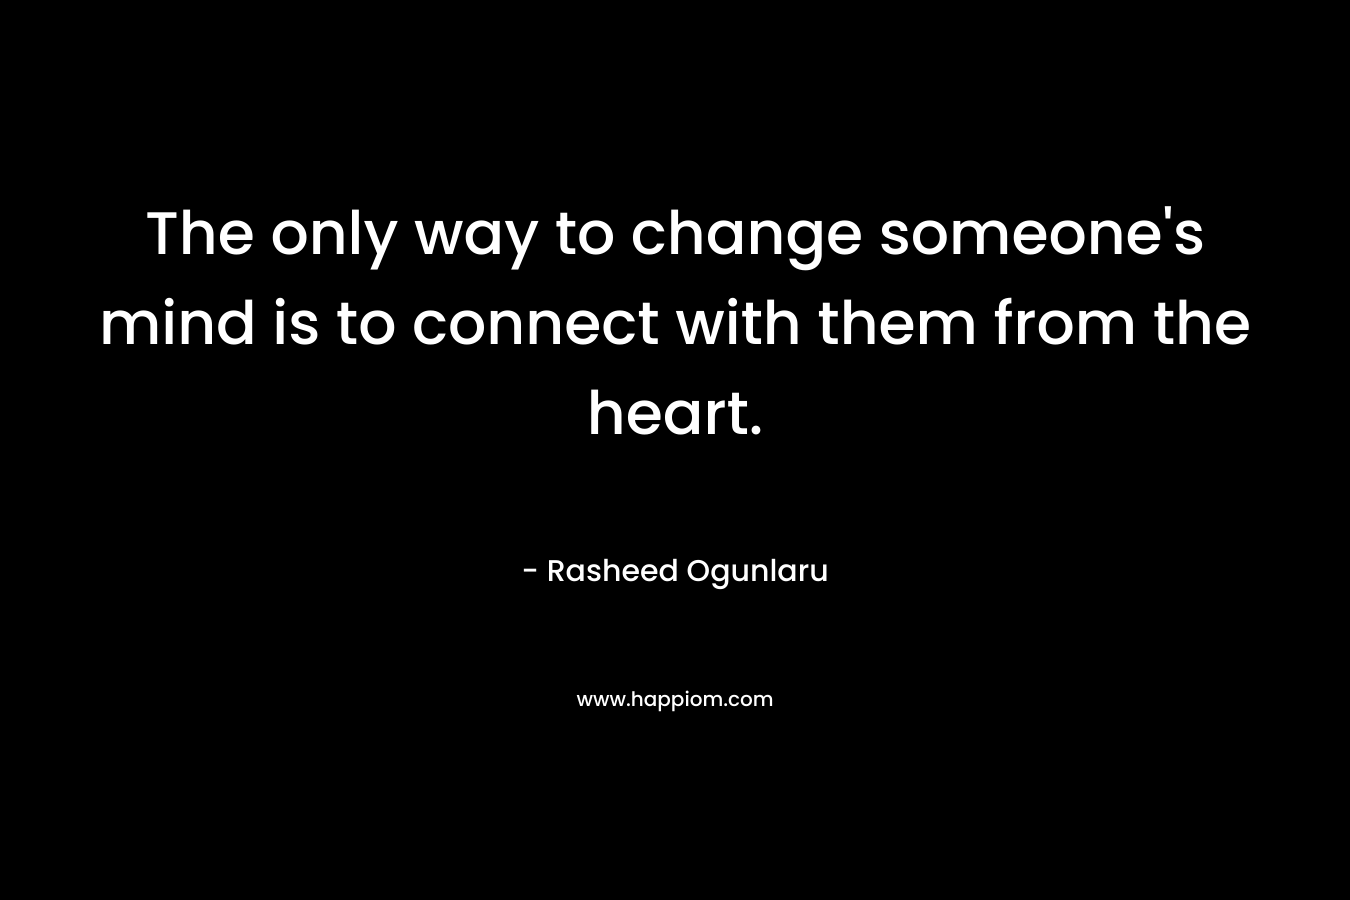 The only way to change someone's mind is to connect with them from the heart.